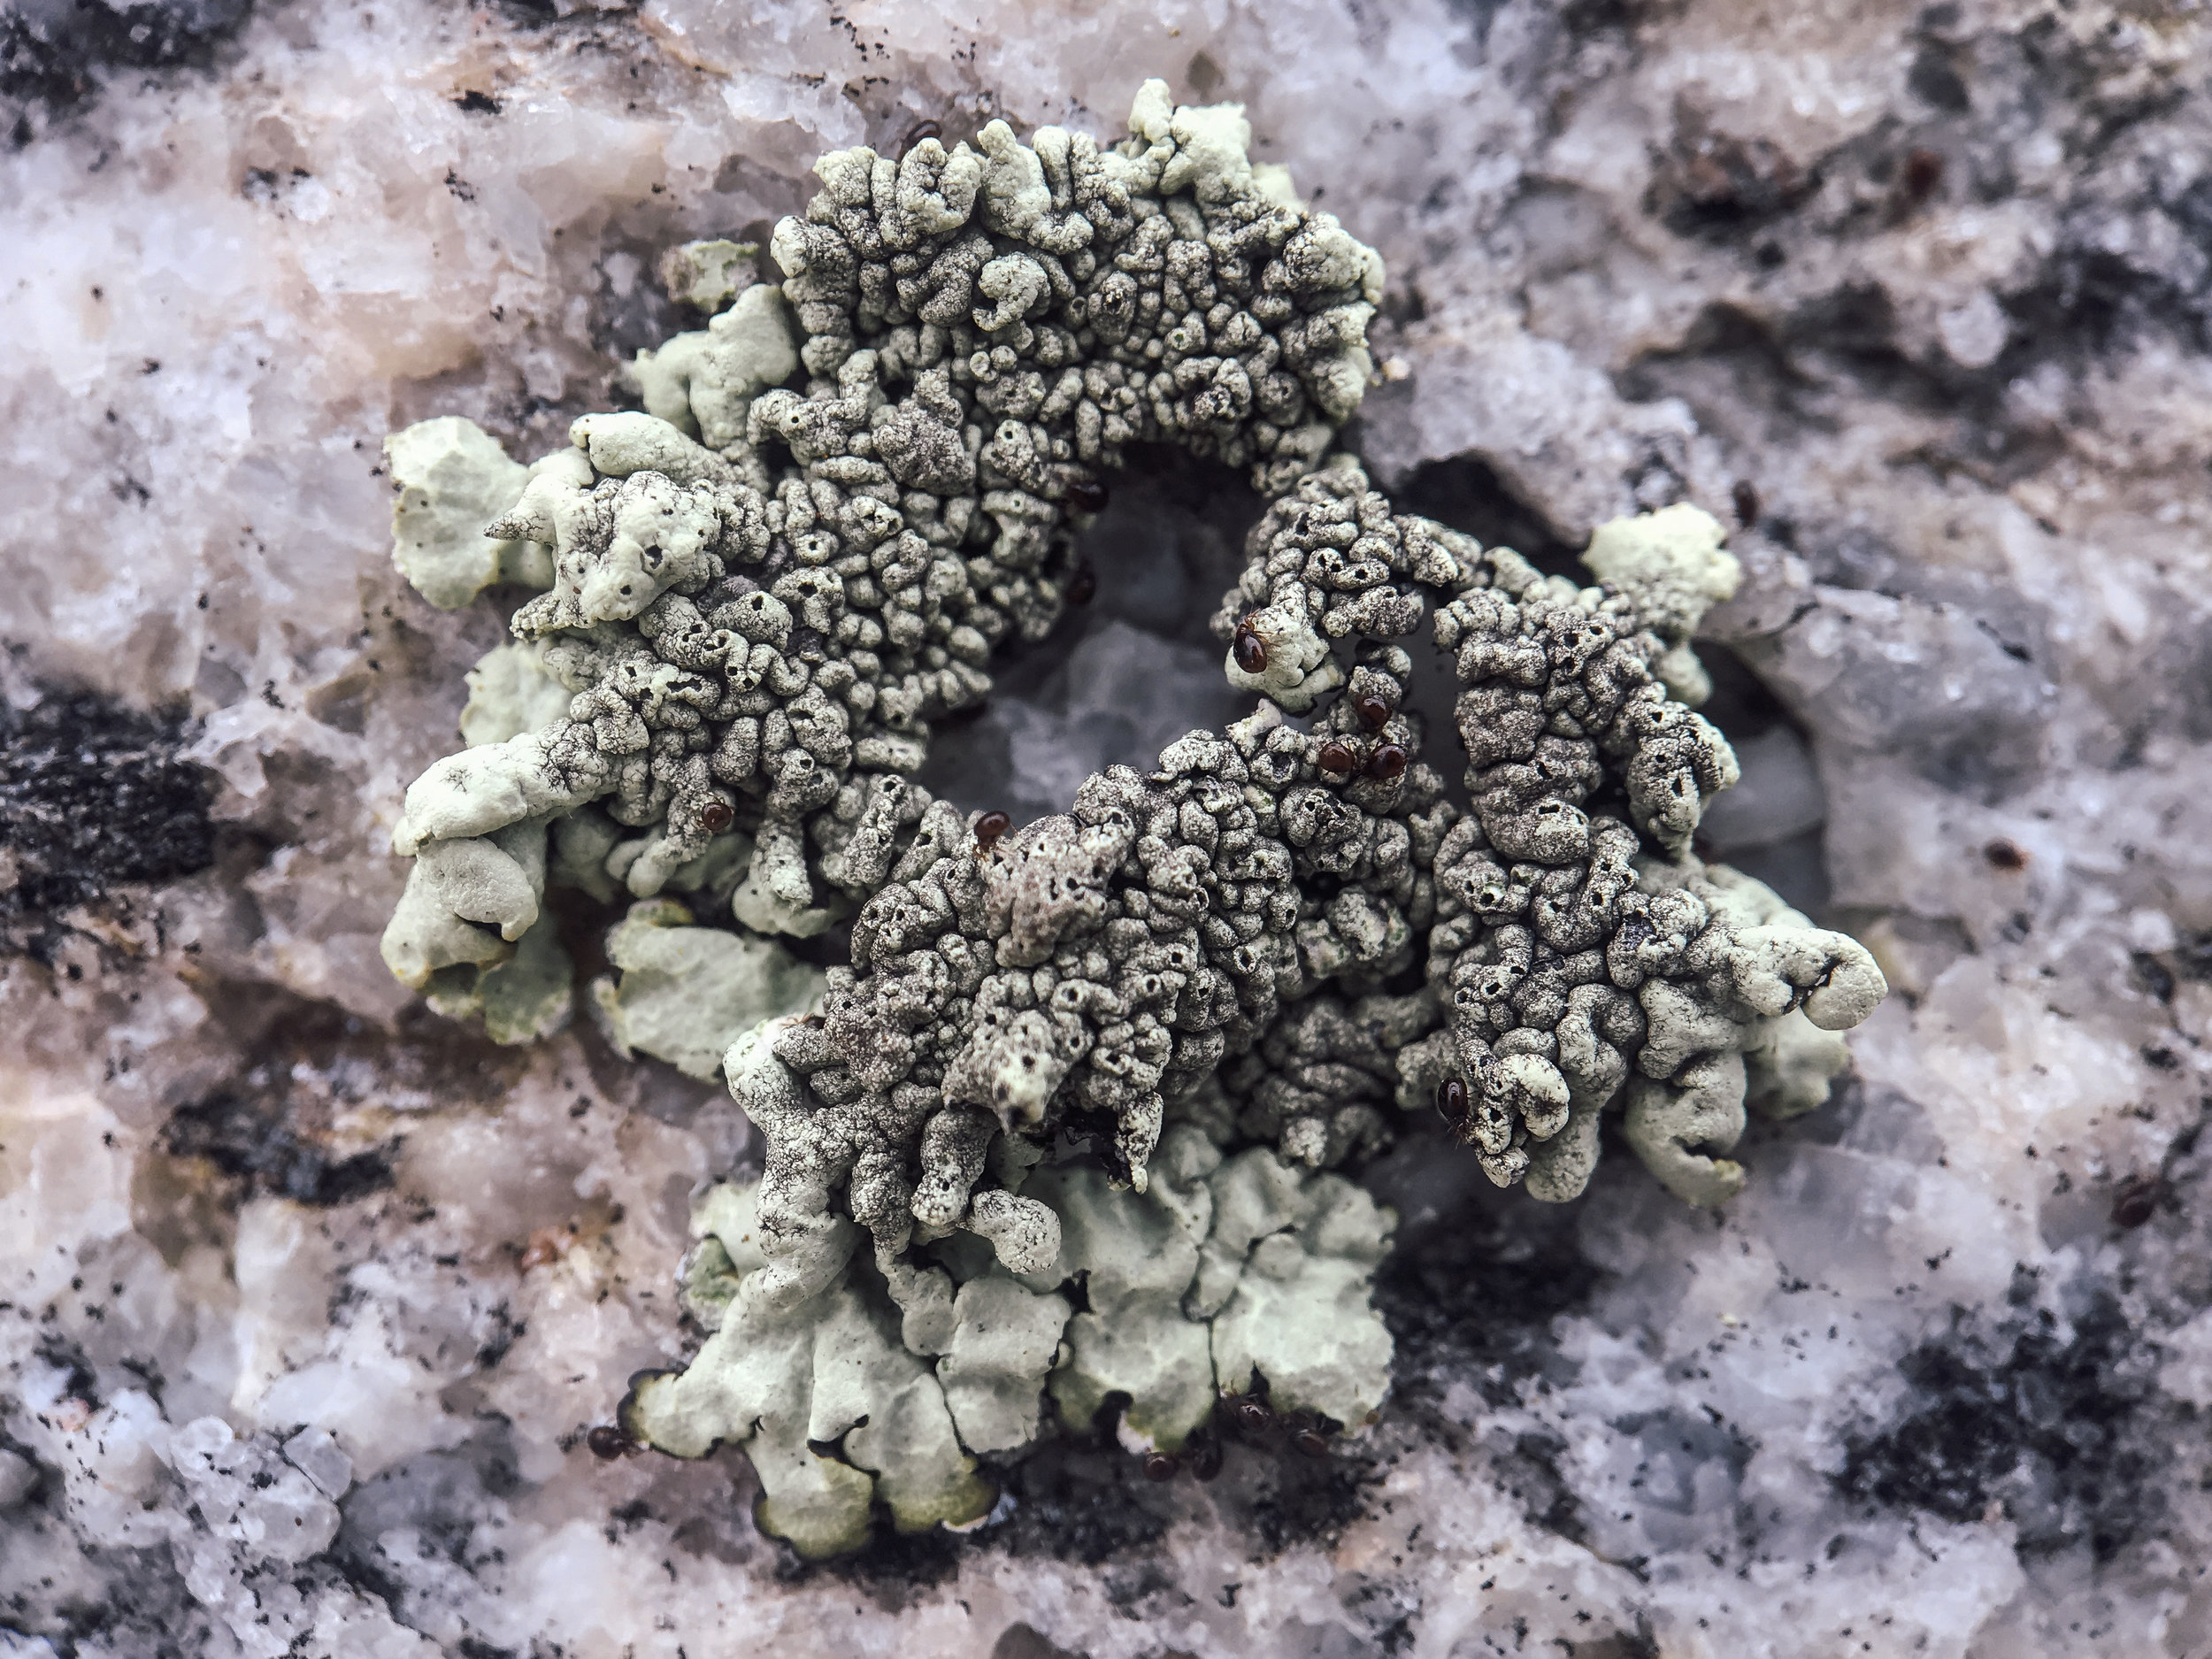 Tiny insects inhabiting what looks like a Xanthoparmelia foliose lichen.